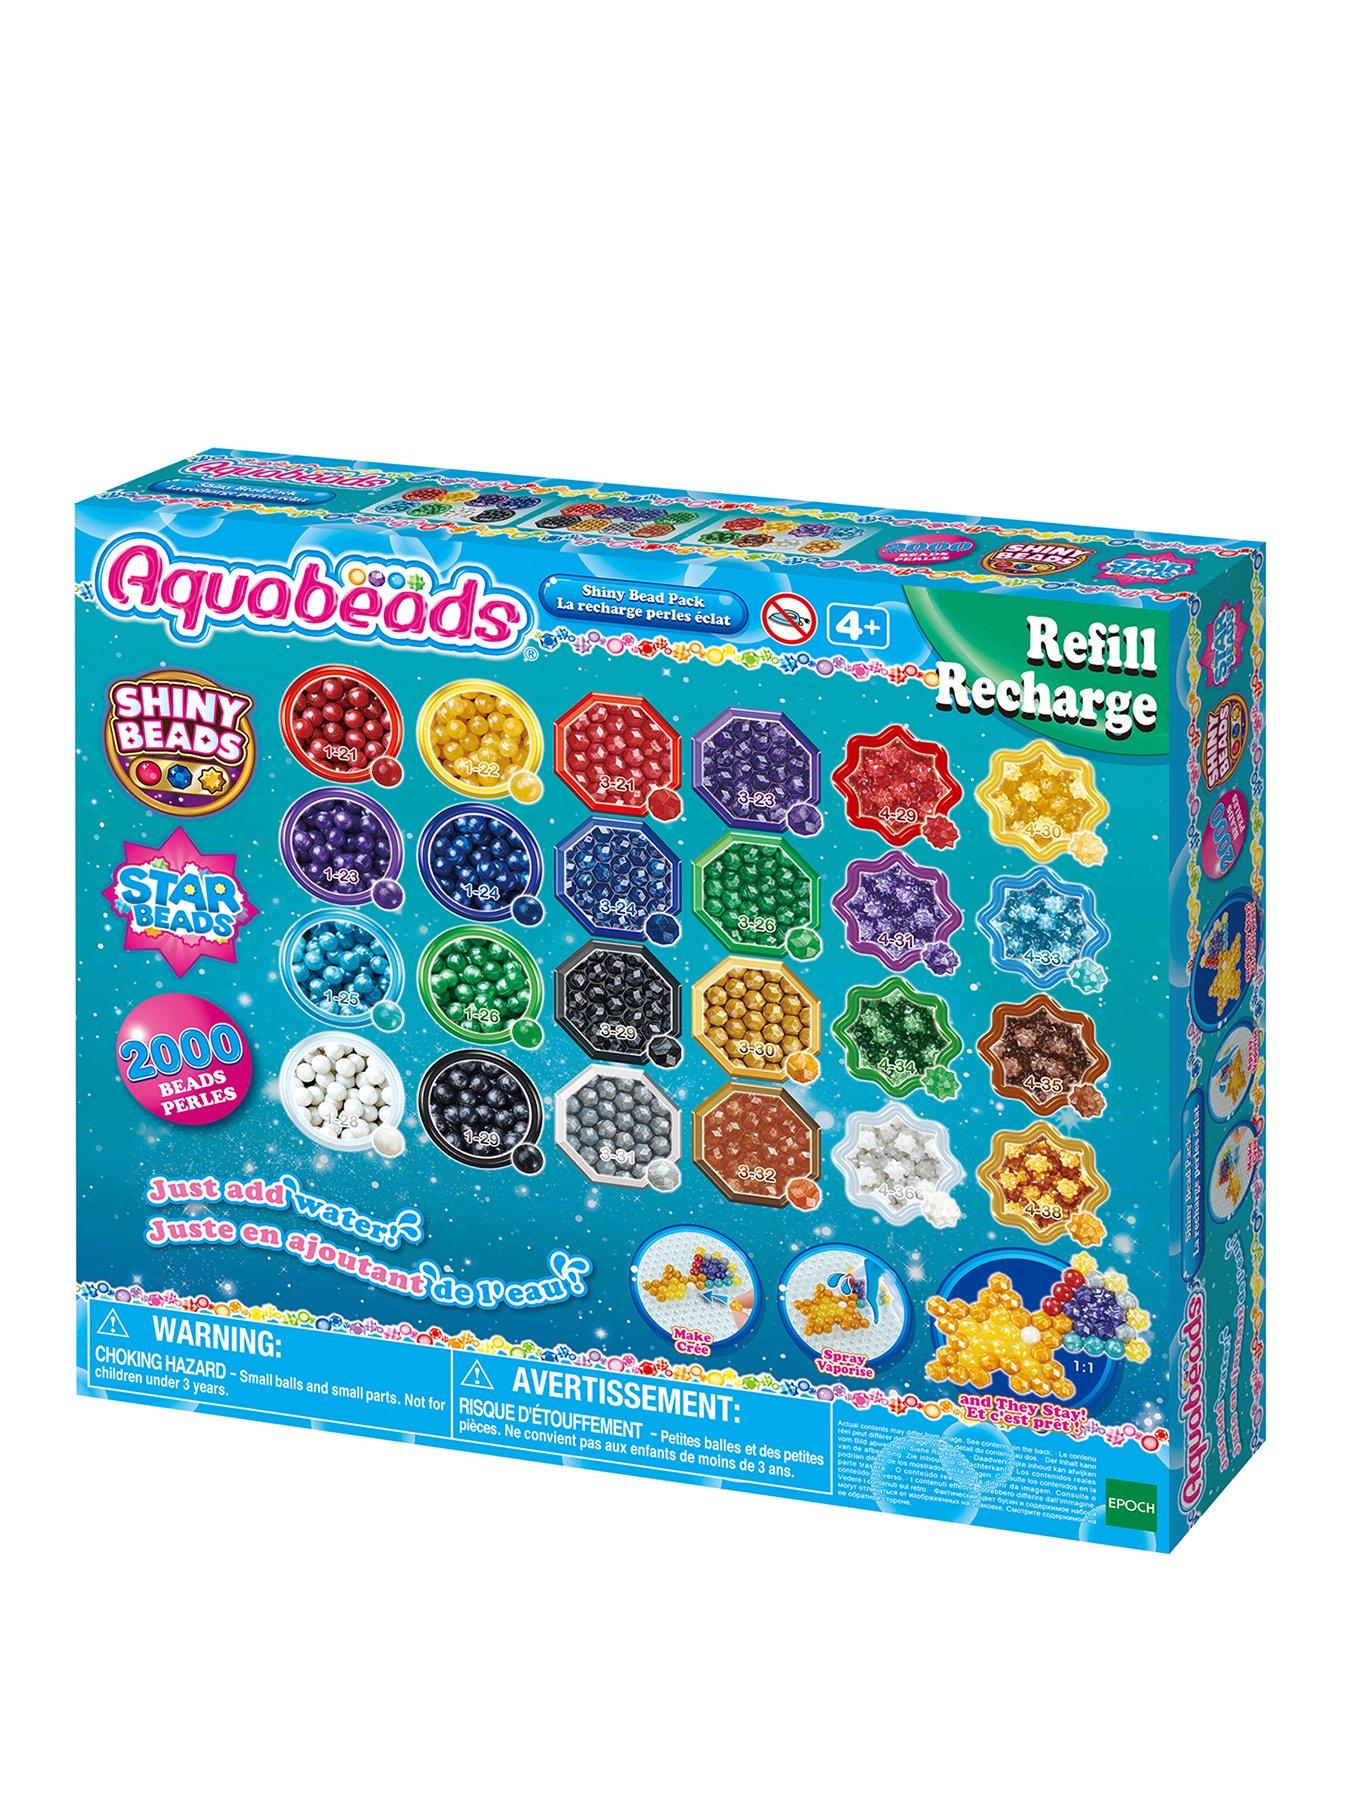  Aquabeads Dreamy Nail Refill : Toys & Games